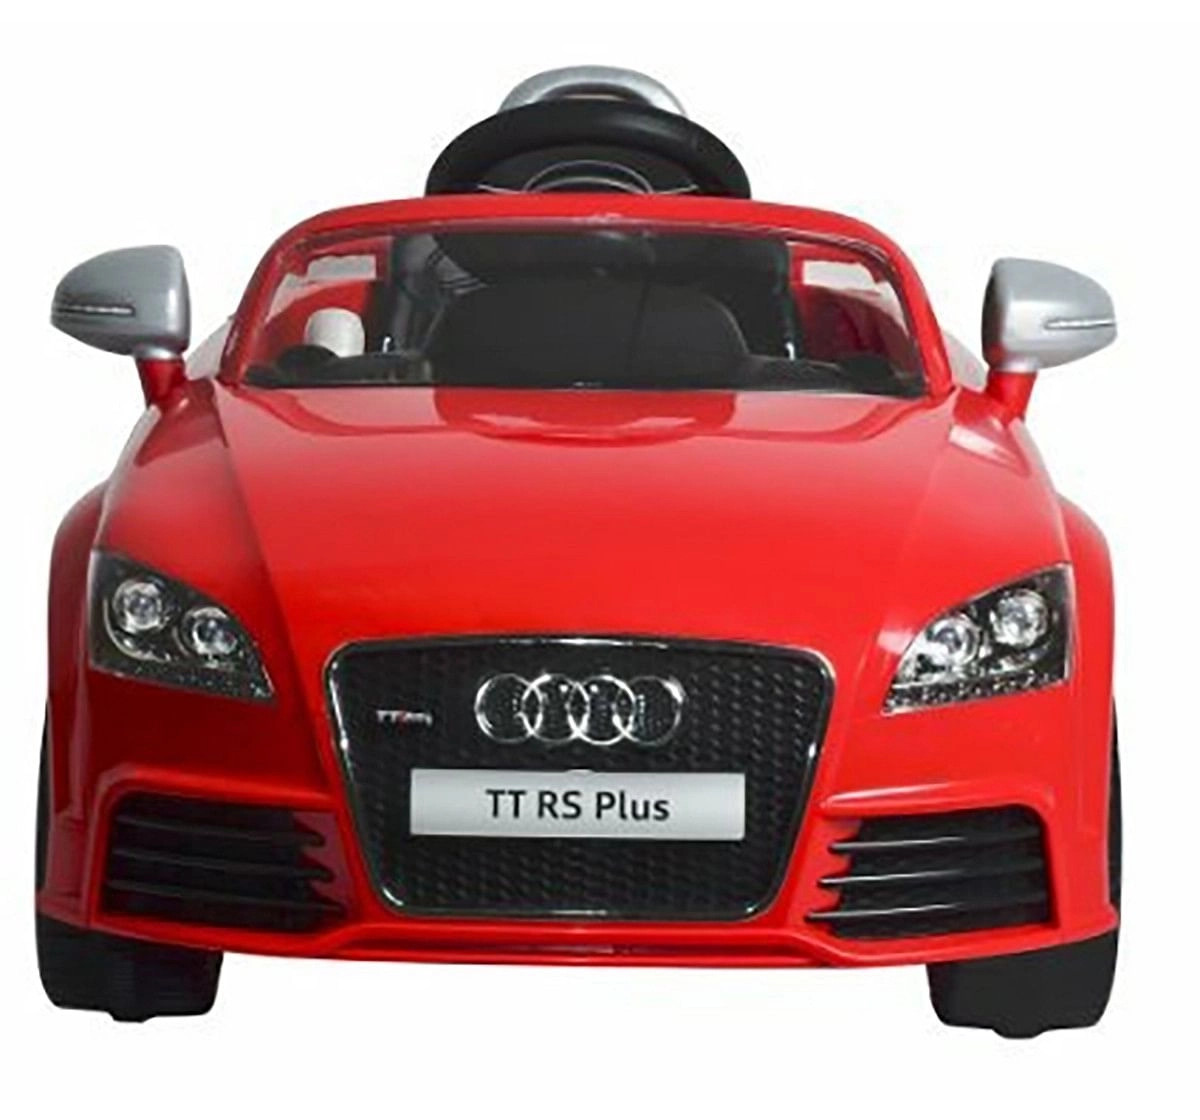 Chilokbo Audi TT RS Battery Operated Ride-on Car Battery Operated Rideons for Kids age 18M + (Red)